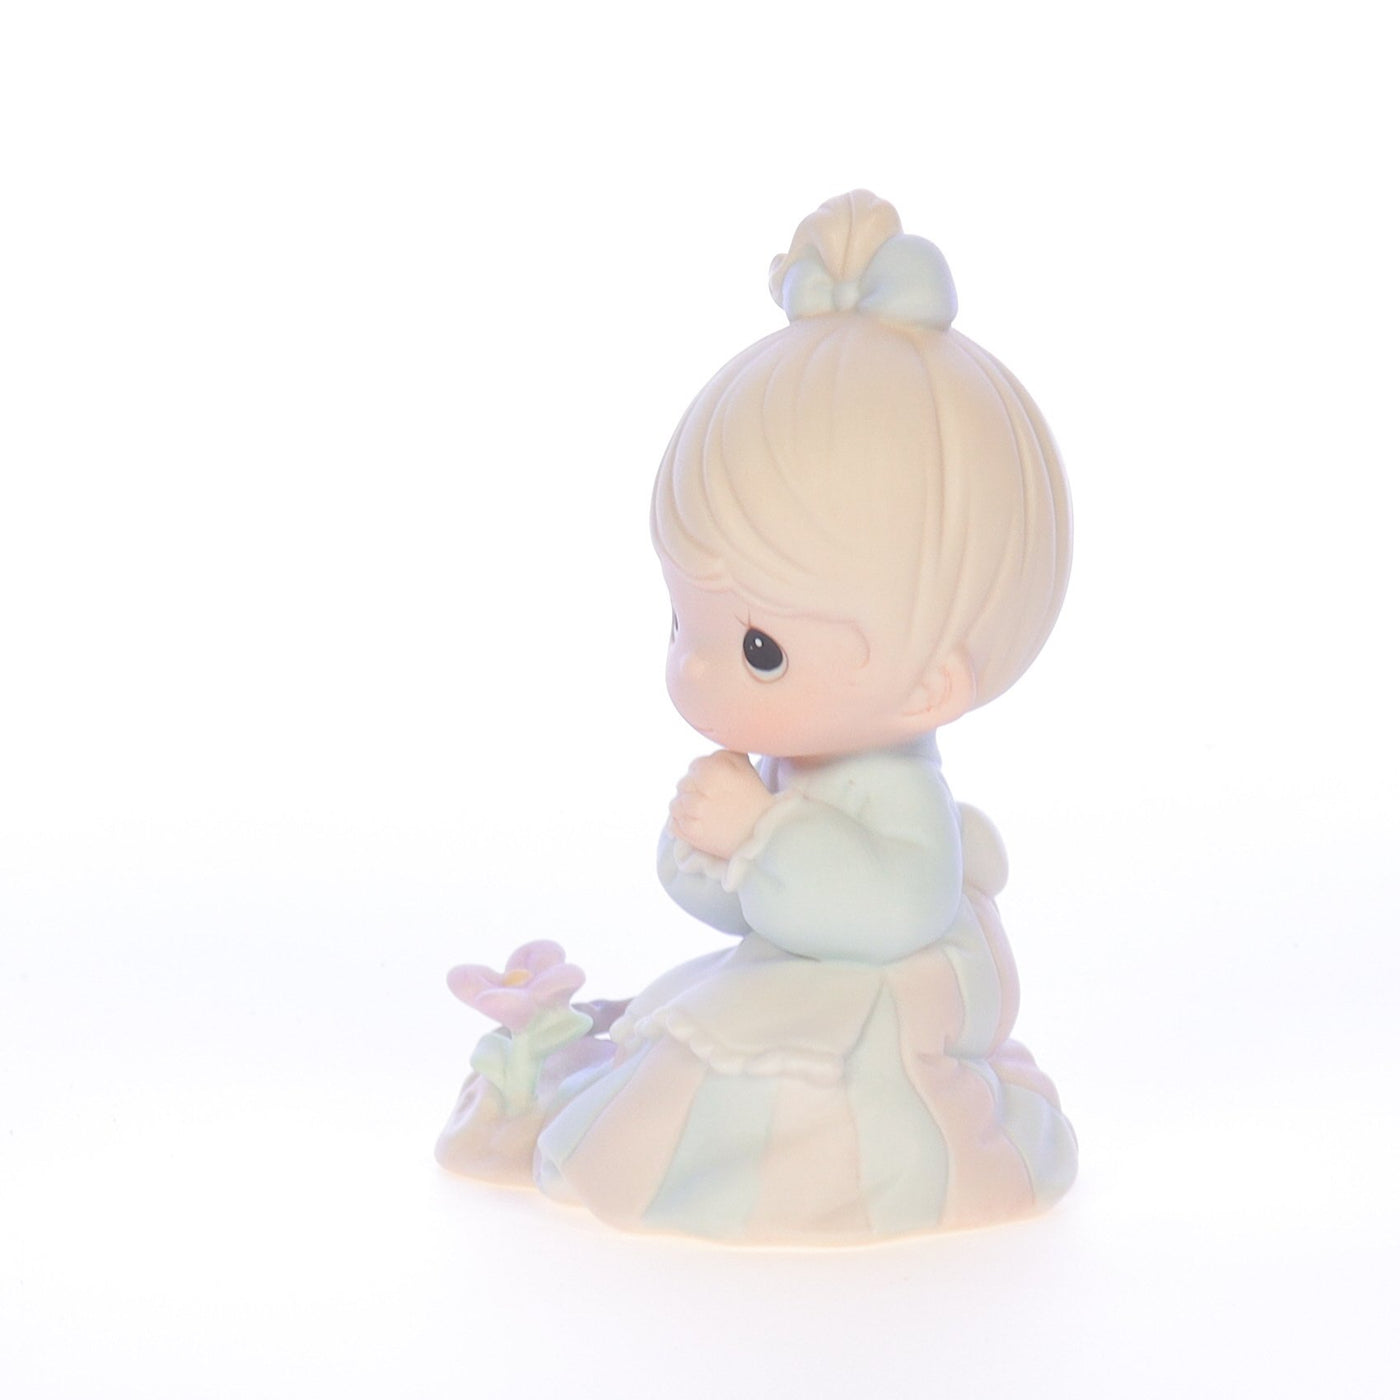 Precious_Moments_Porcelain_Figurine_Sowing_the_Seeds_of_Love_PM922_02.jpg